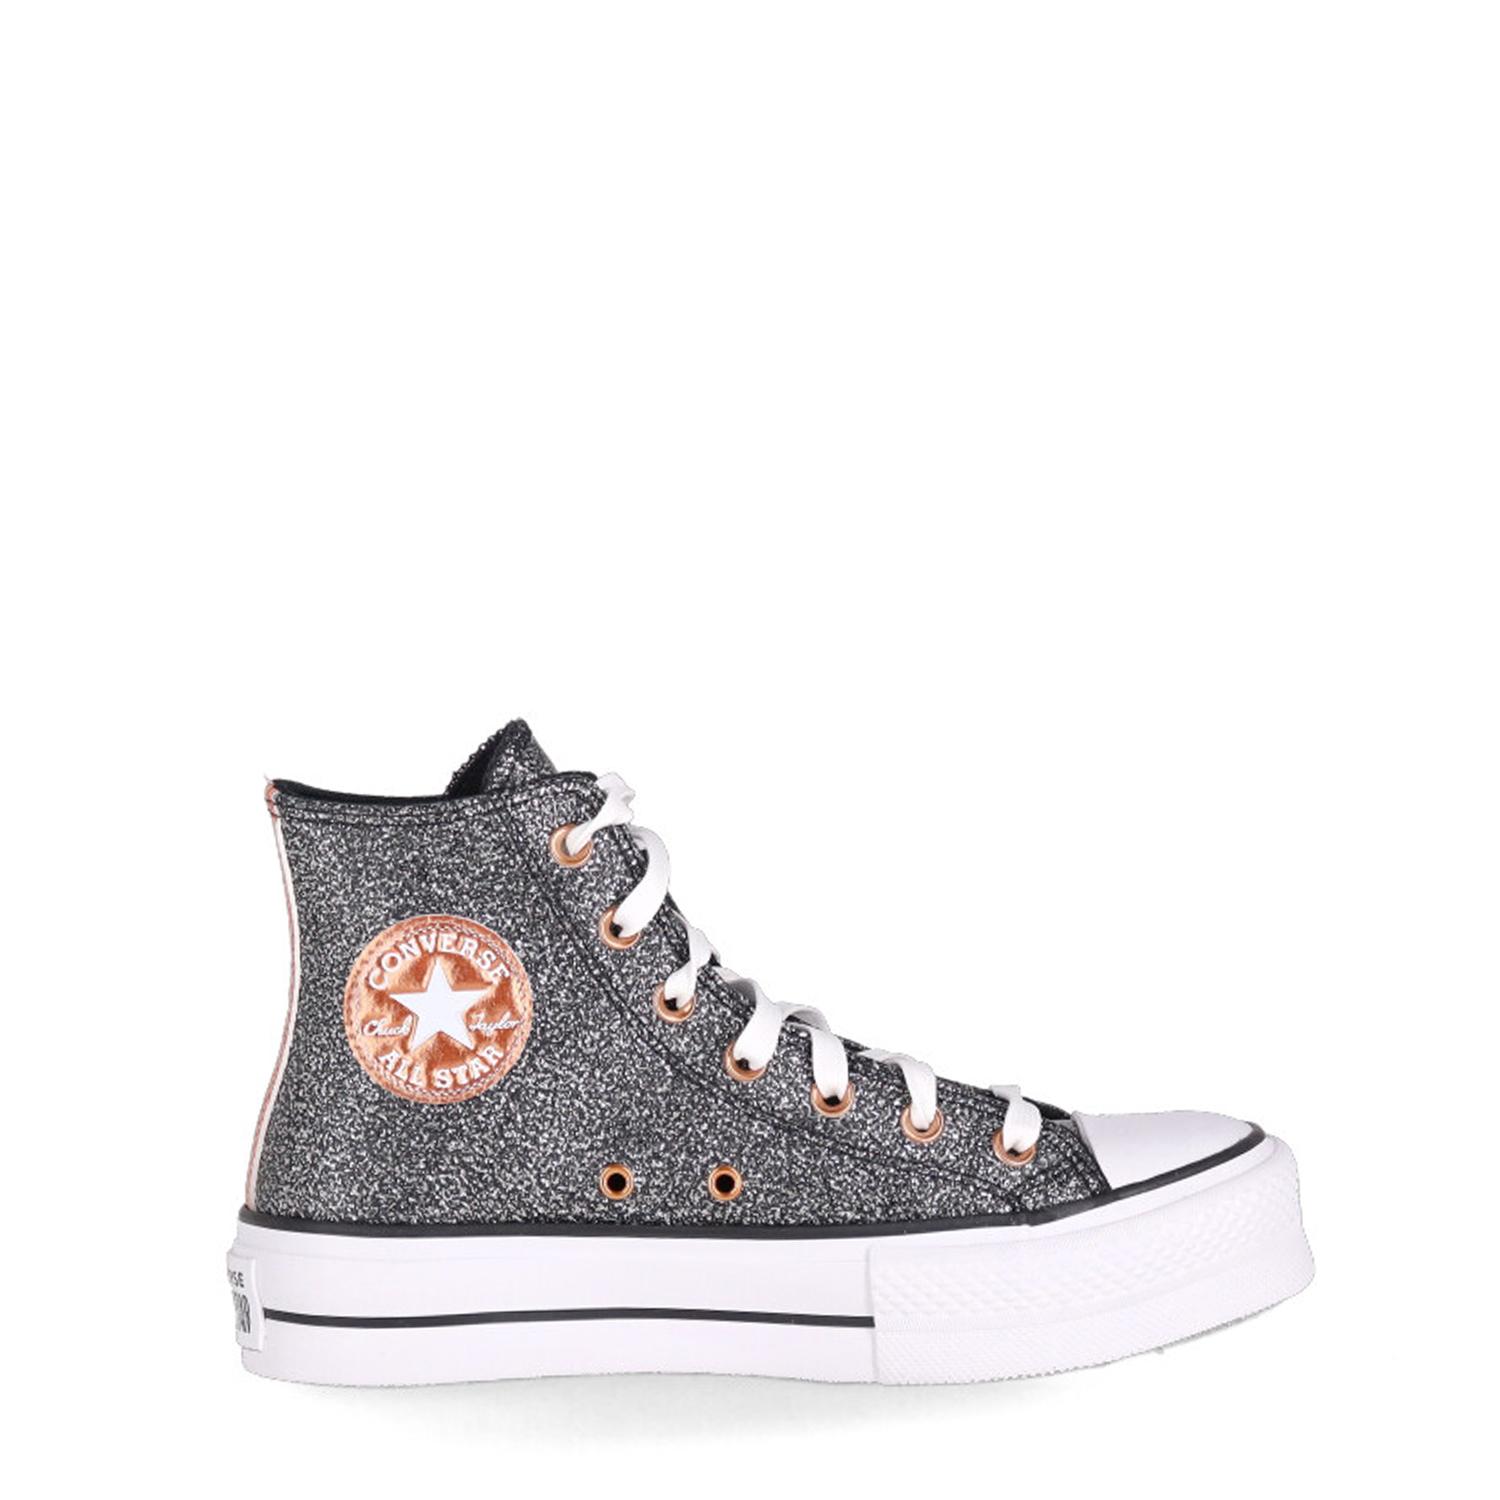 Converse Chuck Taylor All Star Lift Forest Glam BLACK COPPER WHITE 